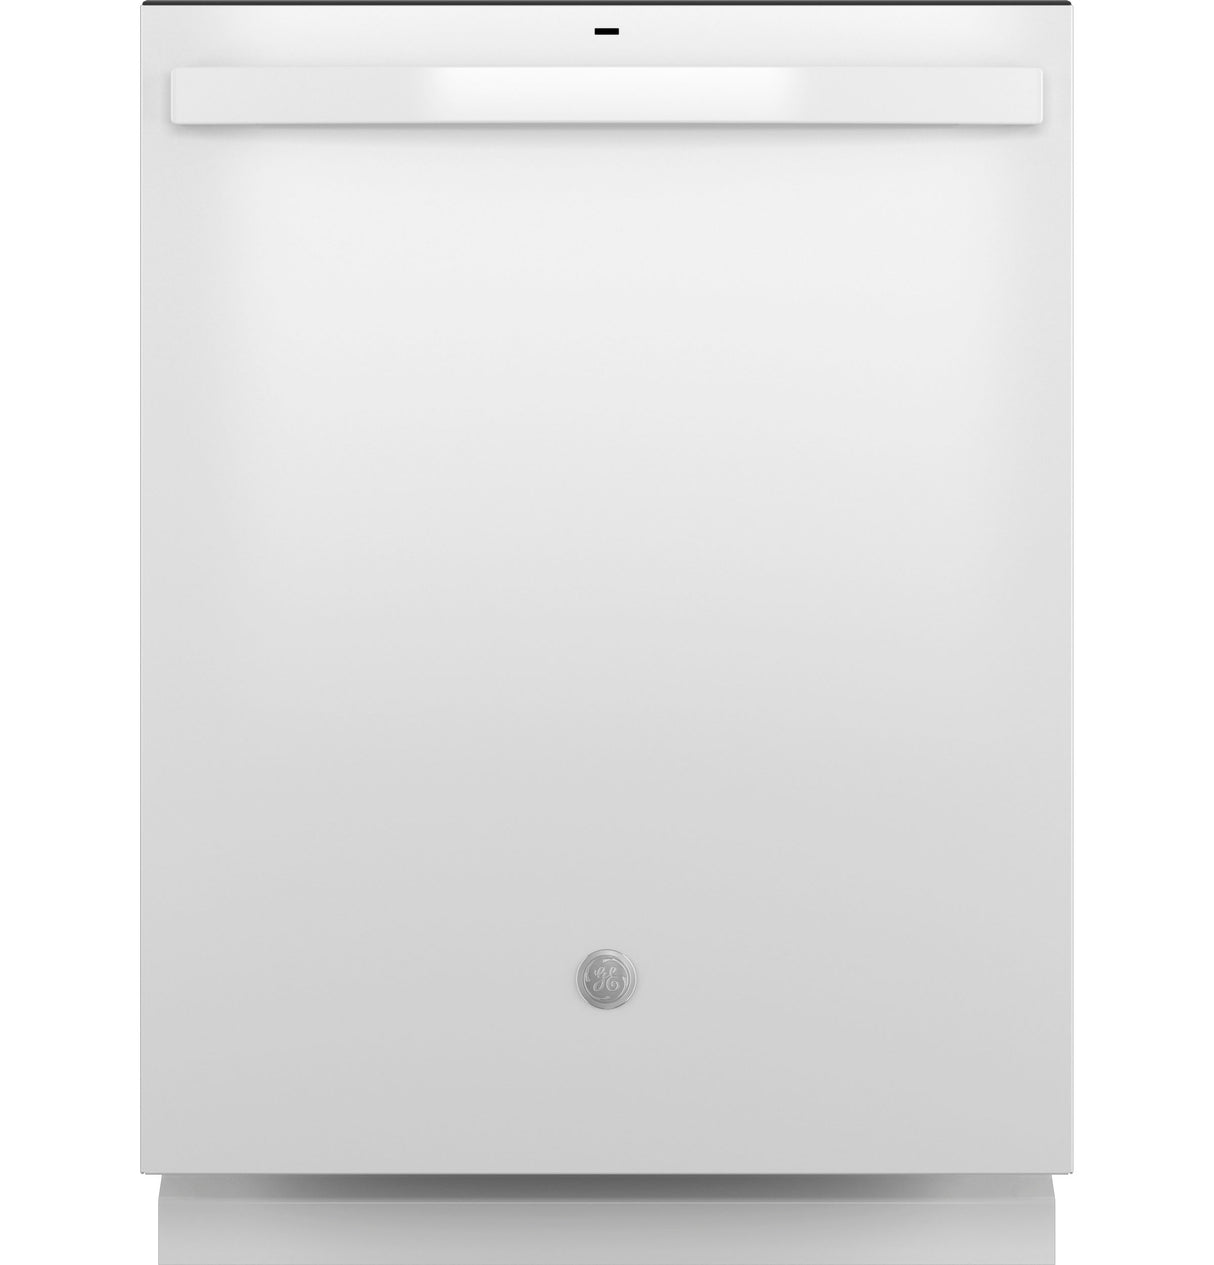 GE(R) ENERGY STAR(R) Top Control with Plastic Interior Dishwasher with Sanitize Cycle & Dry Boost - (GDT535PGRWW)